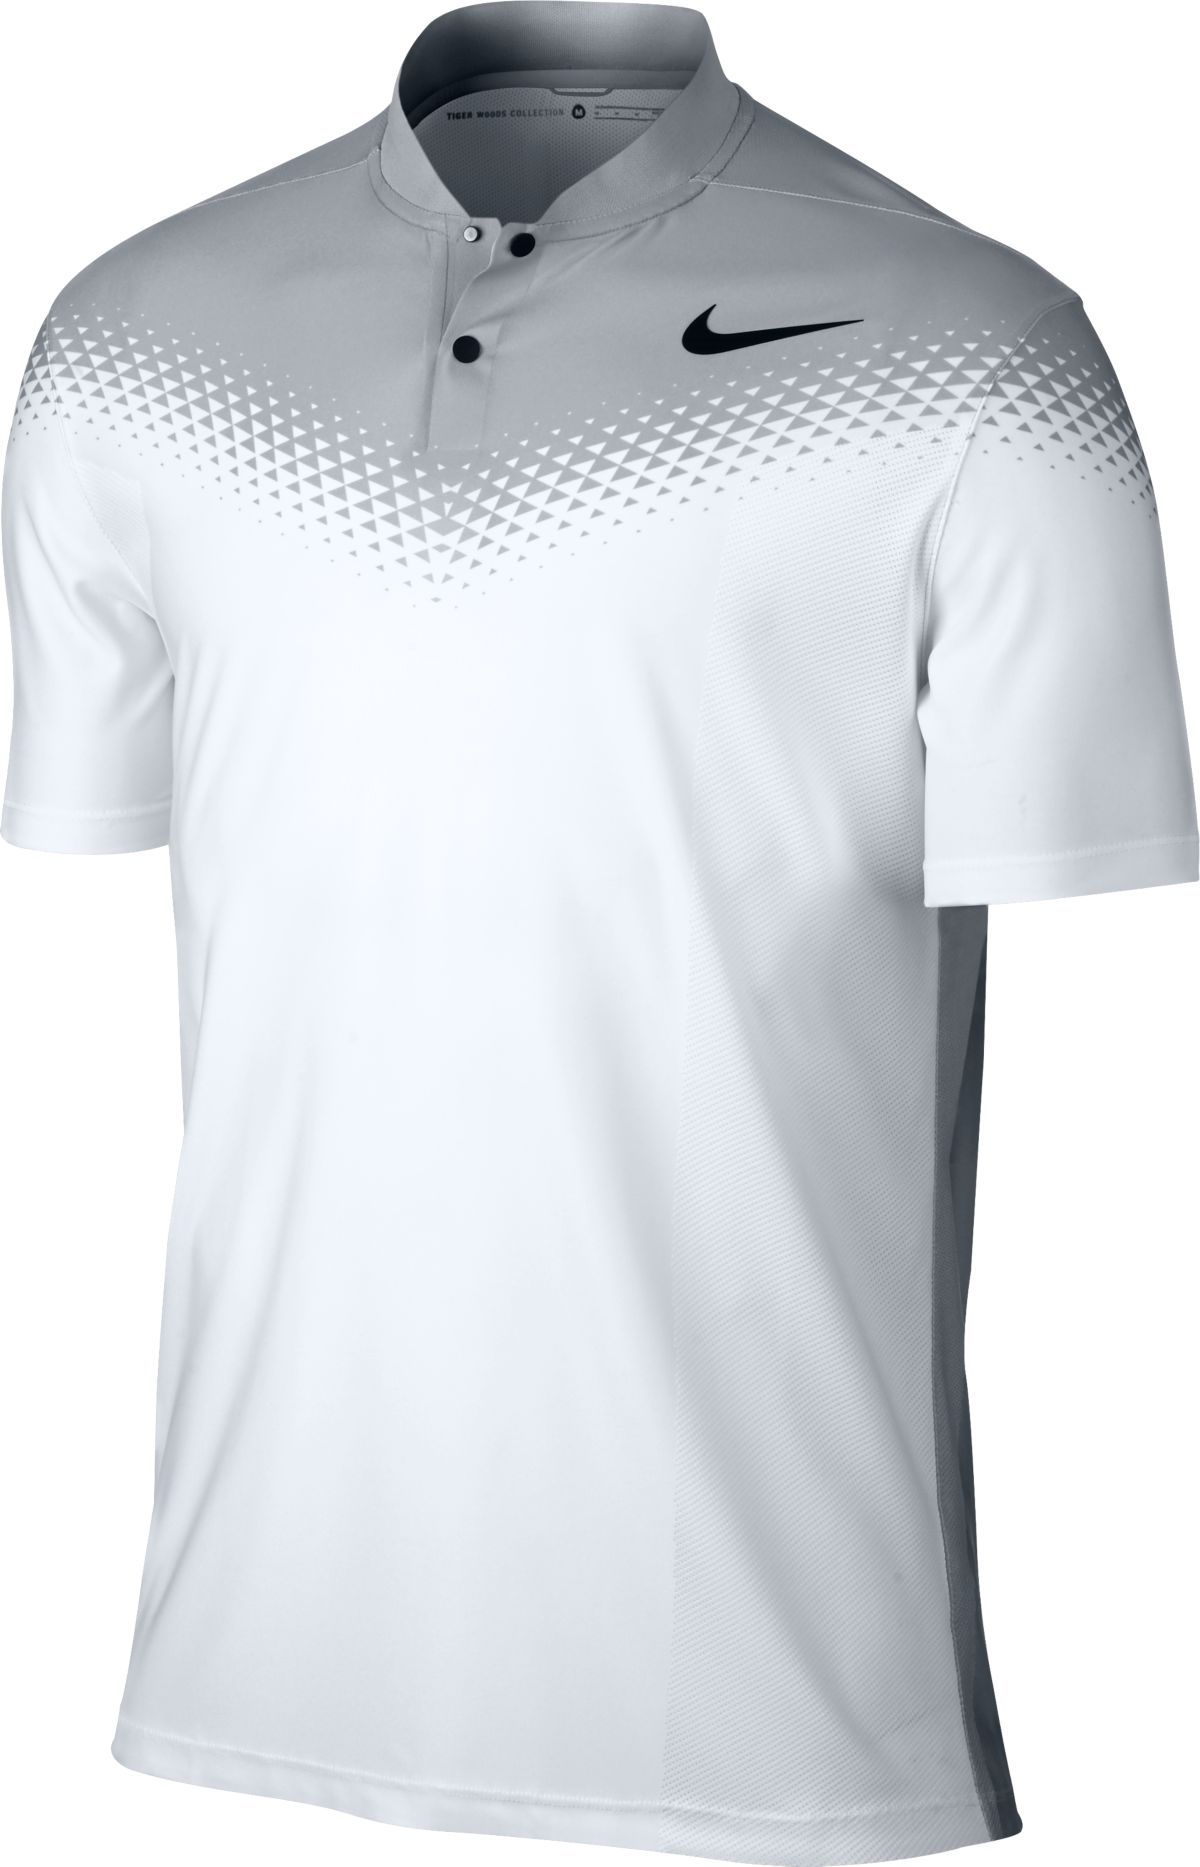 TW Zonal Cooling Mobility 2 Polo 833167 | Golf World